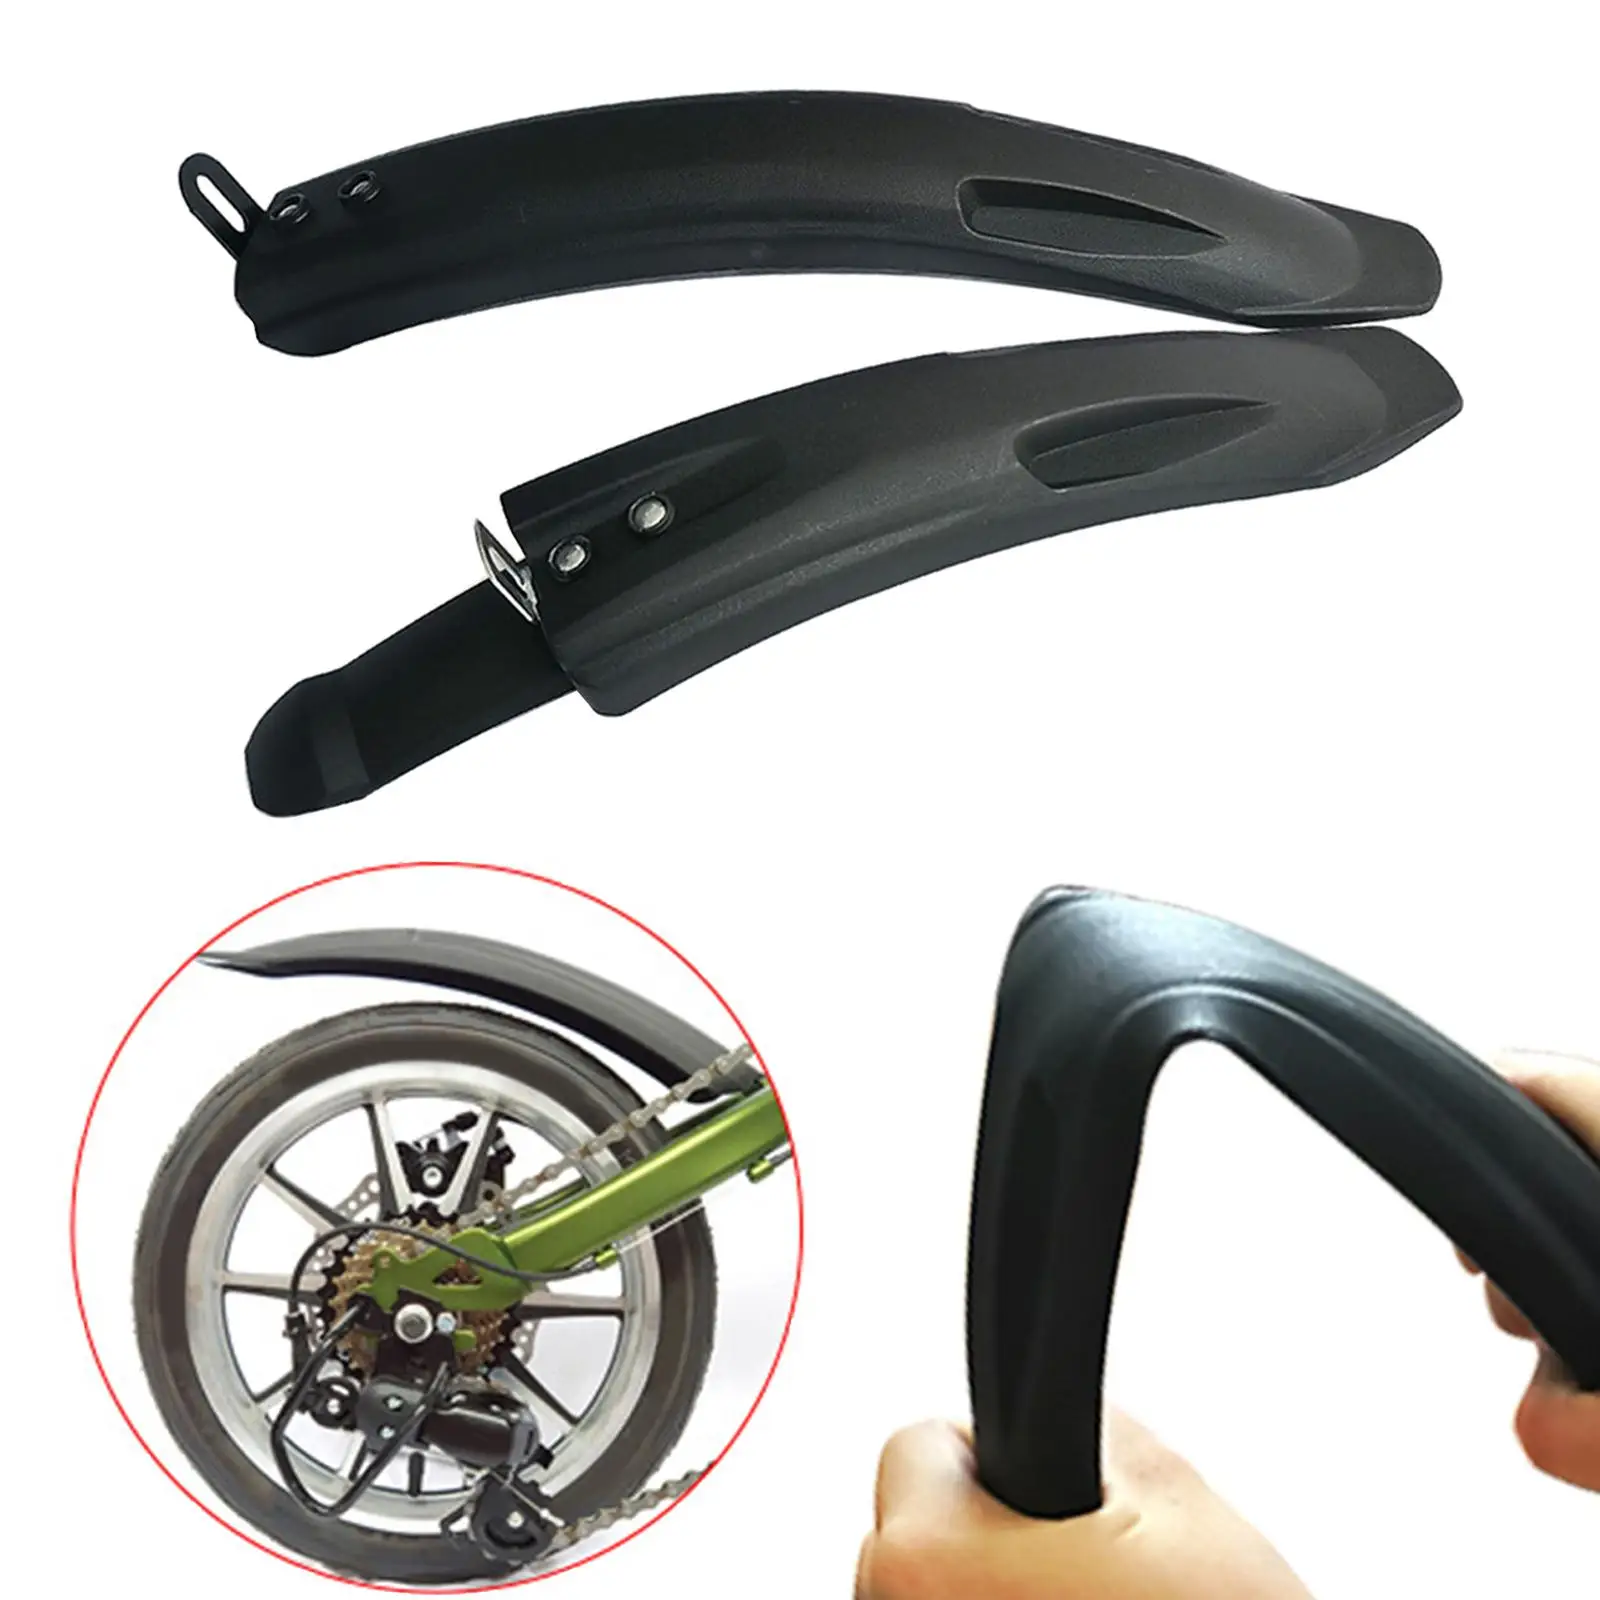 1 Pair Universal 14-18 Inch Bike Universal Fender Tough Mudguard Bicycle Electric Extension Scooter Mudguard For Motorcycle